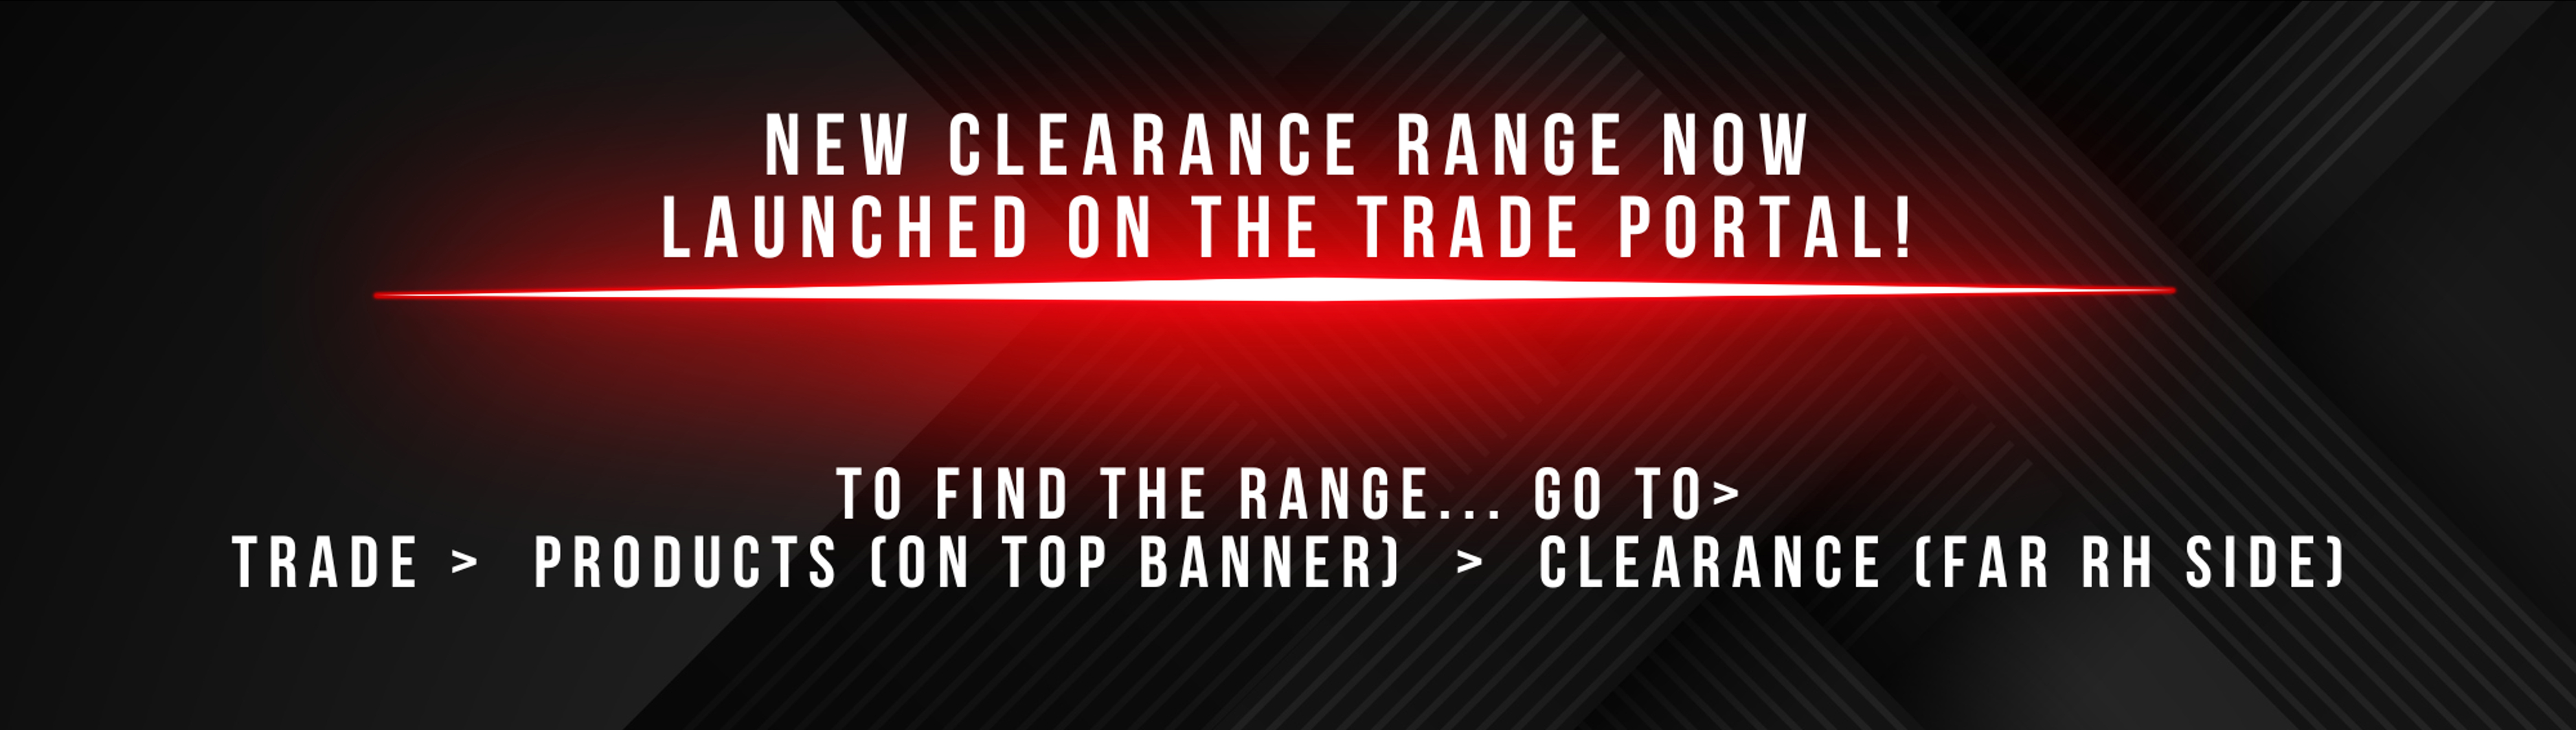 Clearance Range on Portals